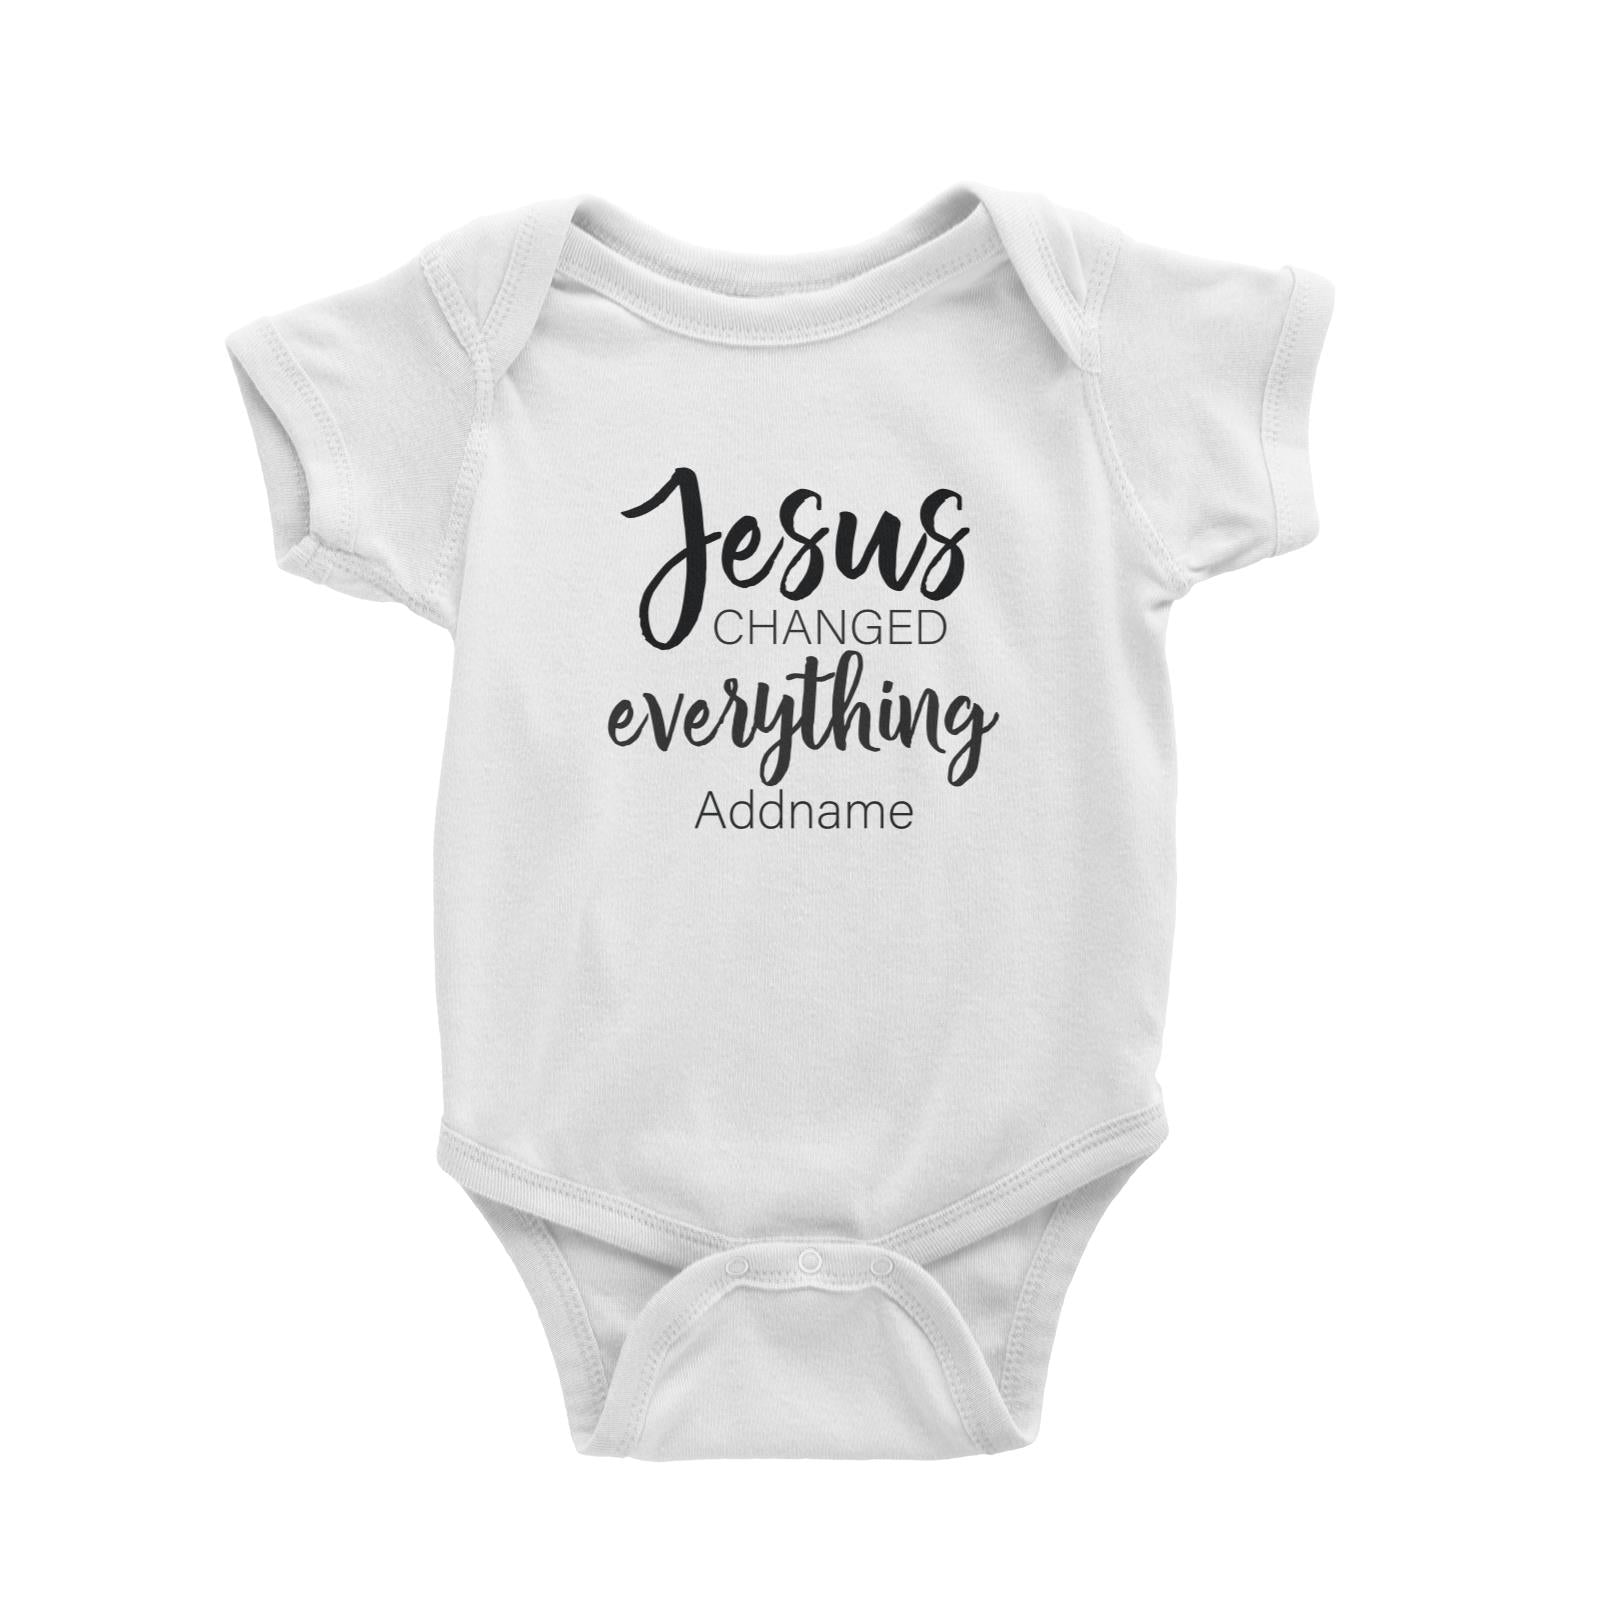 Christian Series Jesus Changed Everthing Addname Baby Romper